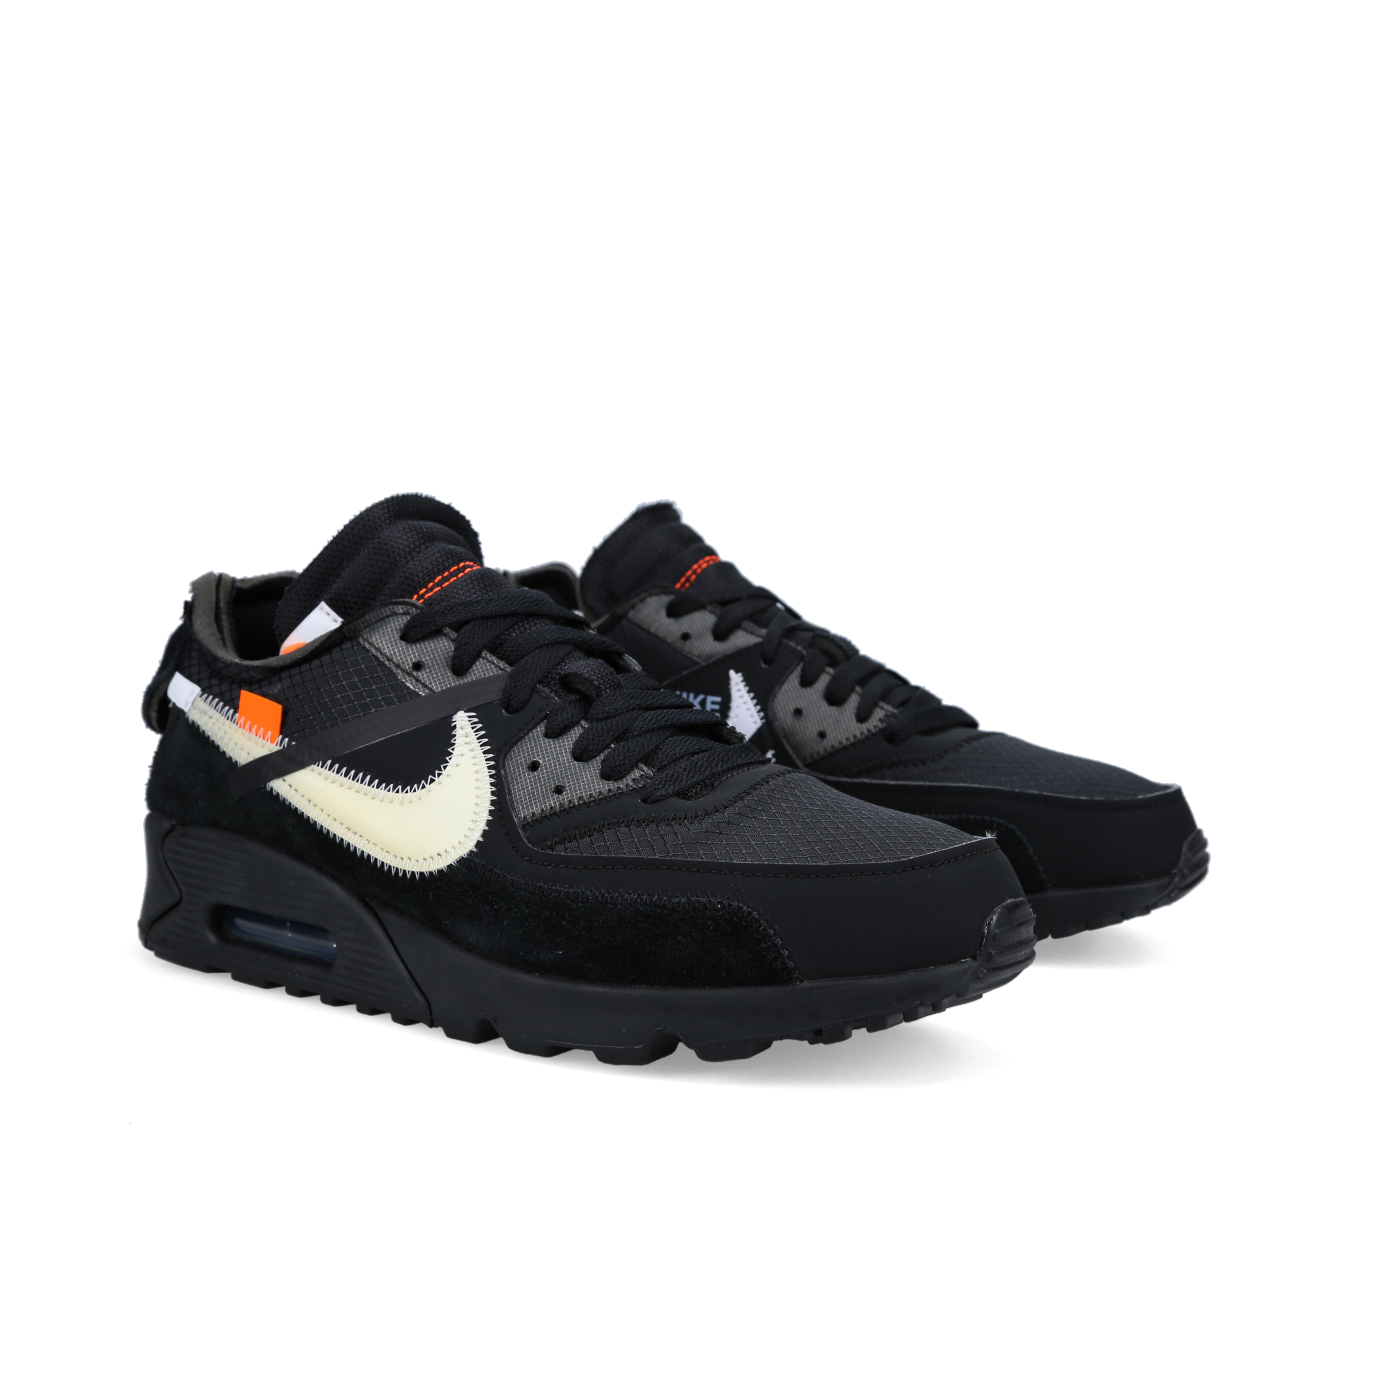 Off-White X Nike Air Max 90 'Black' - Front View